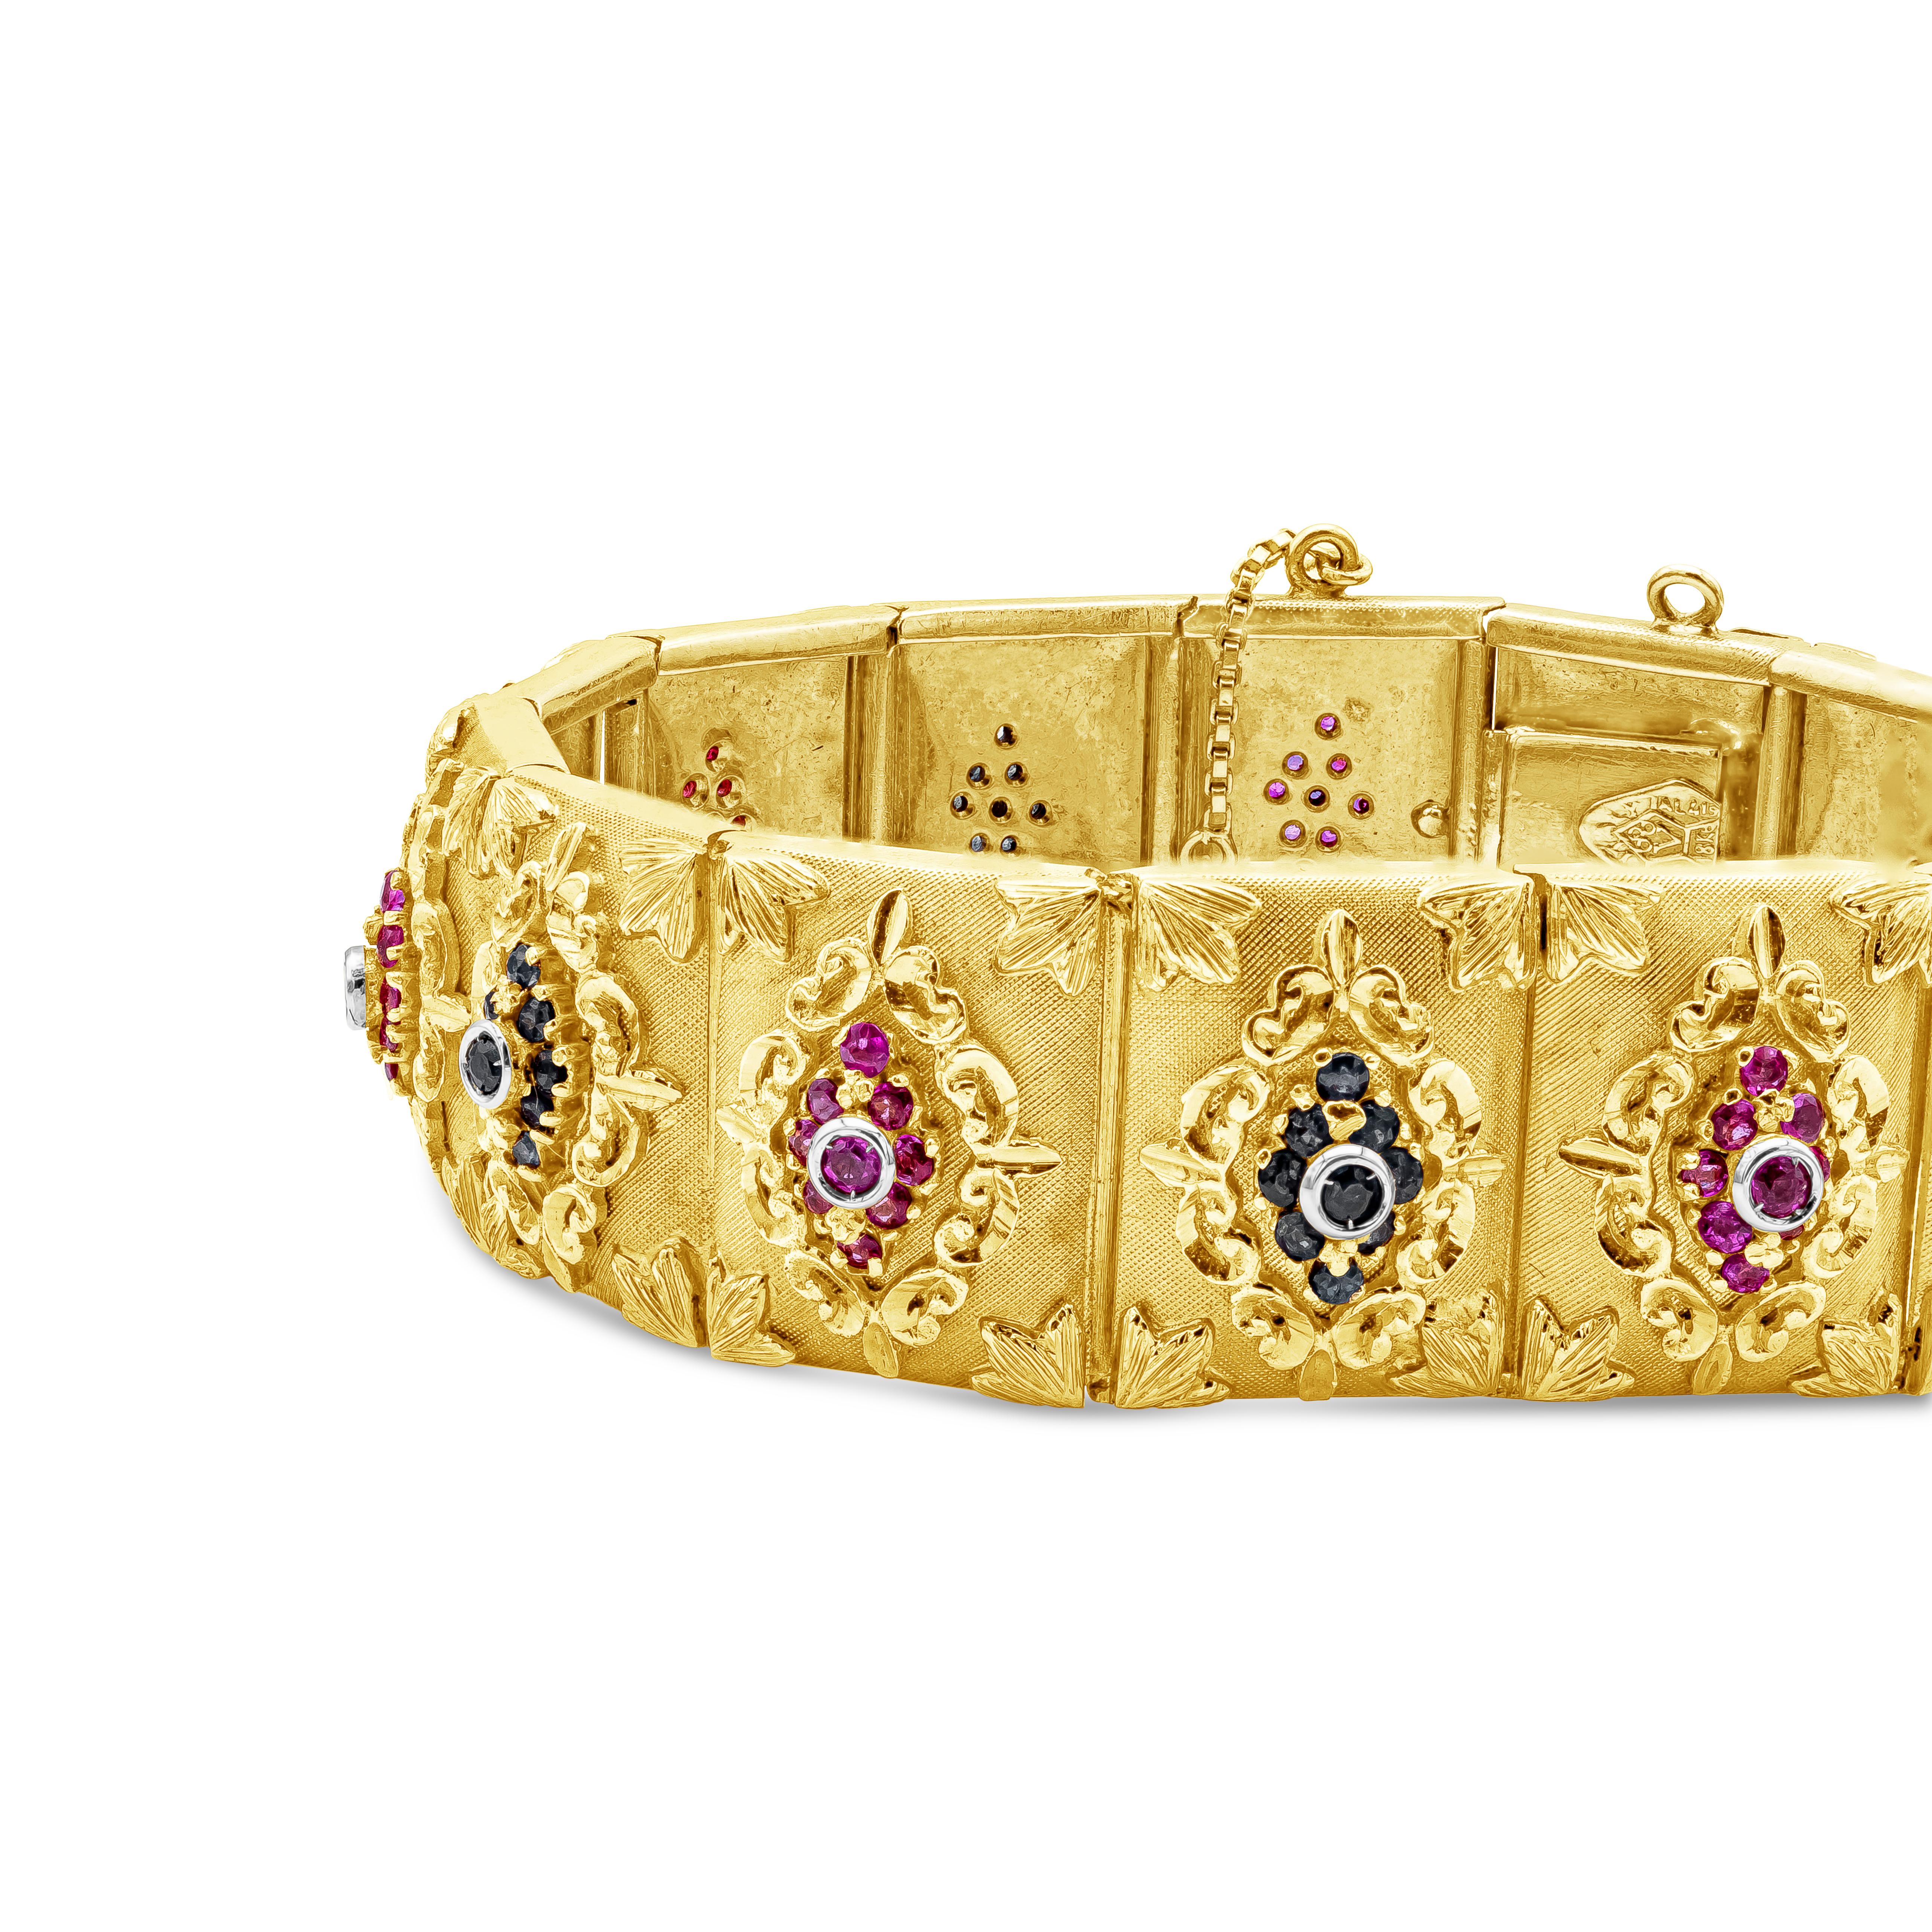 A gorgeous fashionable handcrafted design bracelet made in 18K Yellow Gold weighing 55 grams. Accented with red ruby and blue sapphire weighing 3.80 carats total, wrapped with embossed ornament design. 

Roman Malakov is a custom house, specializing